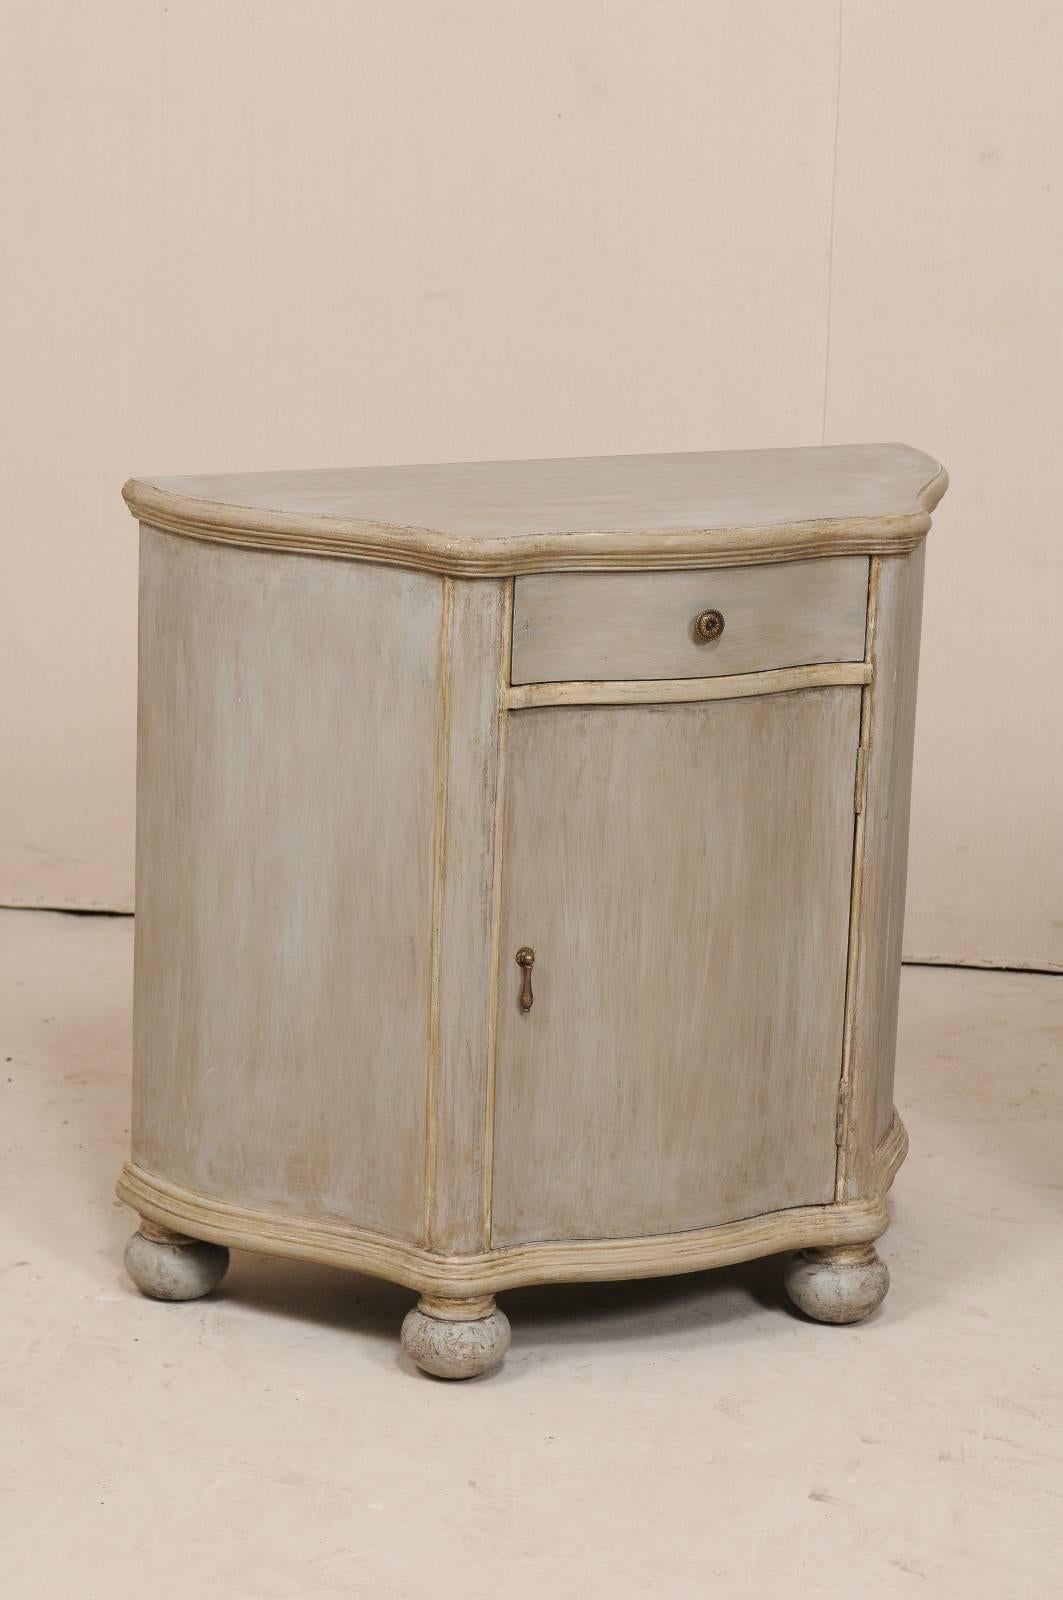 American Pair of Vintage Painted Wood Demi-Styled Cabinets on Rounded Bun Feet